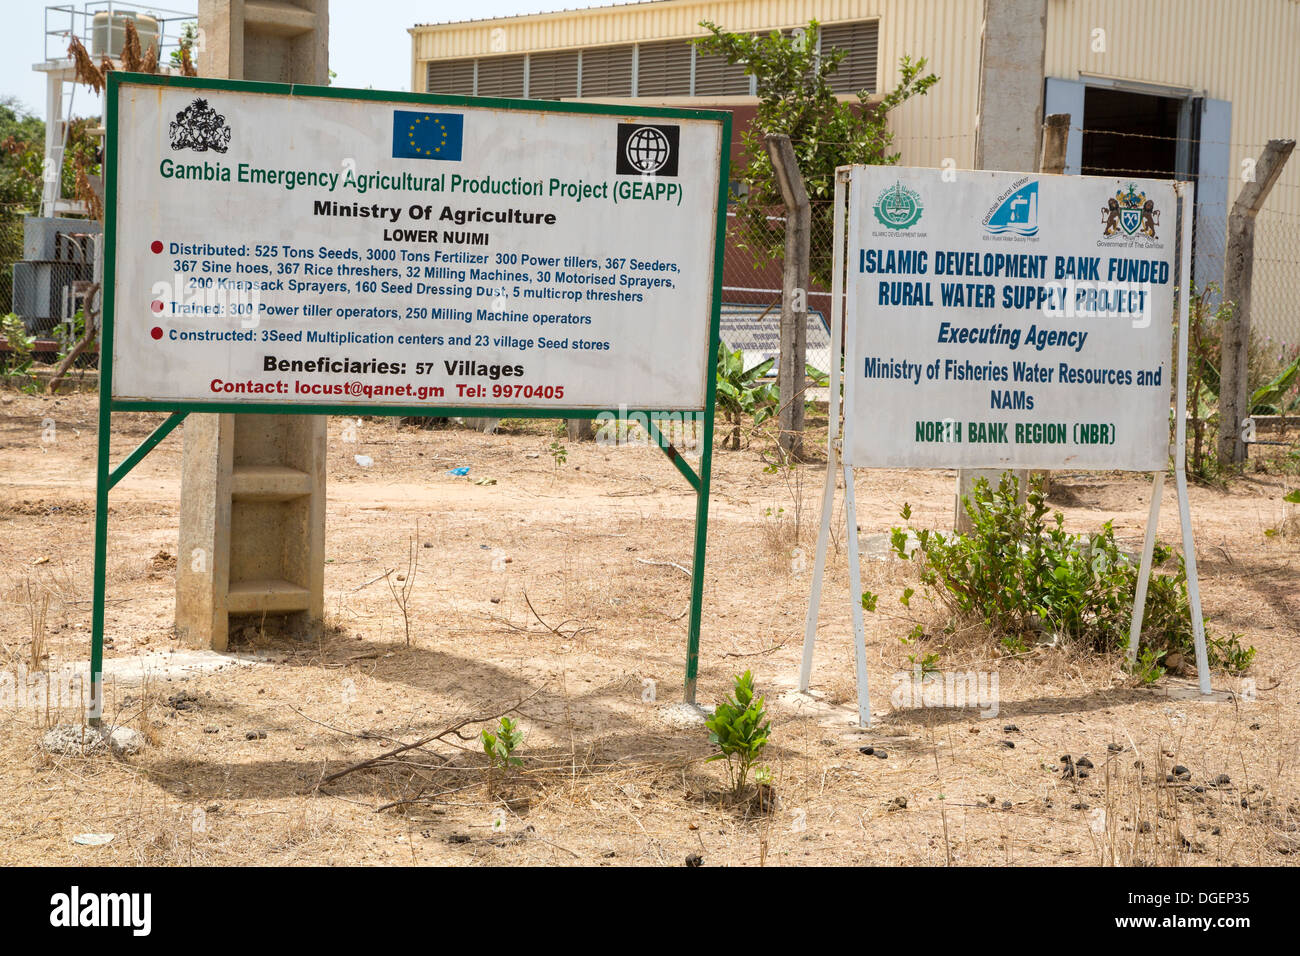 Foreign Aid Signs. Islamic Development Bank Water Project, European Union Agricultural Project, North Bank Region, The Gambia. Stock Photo